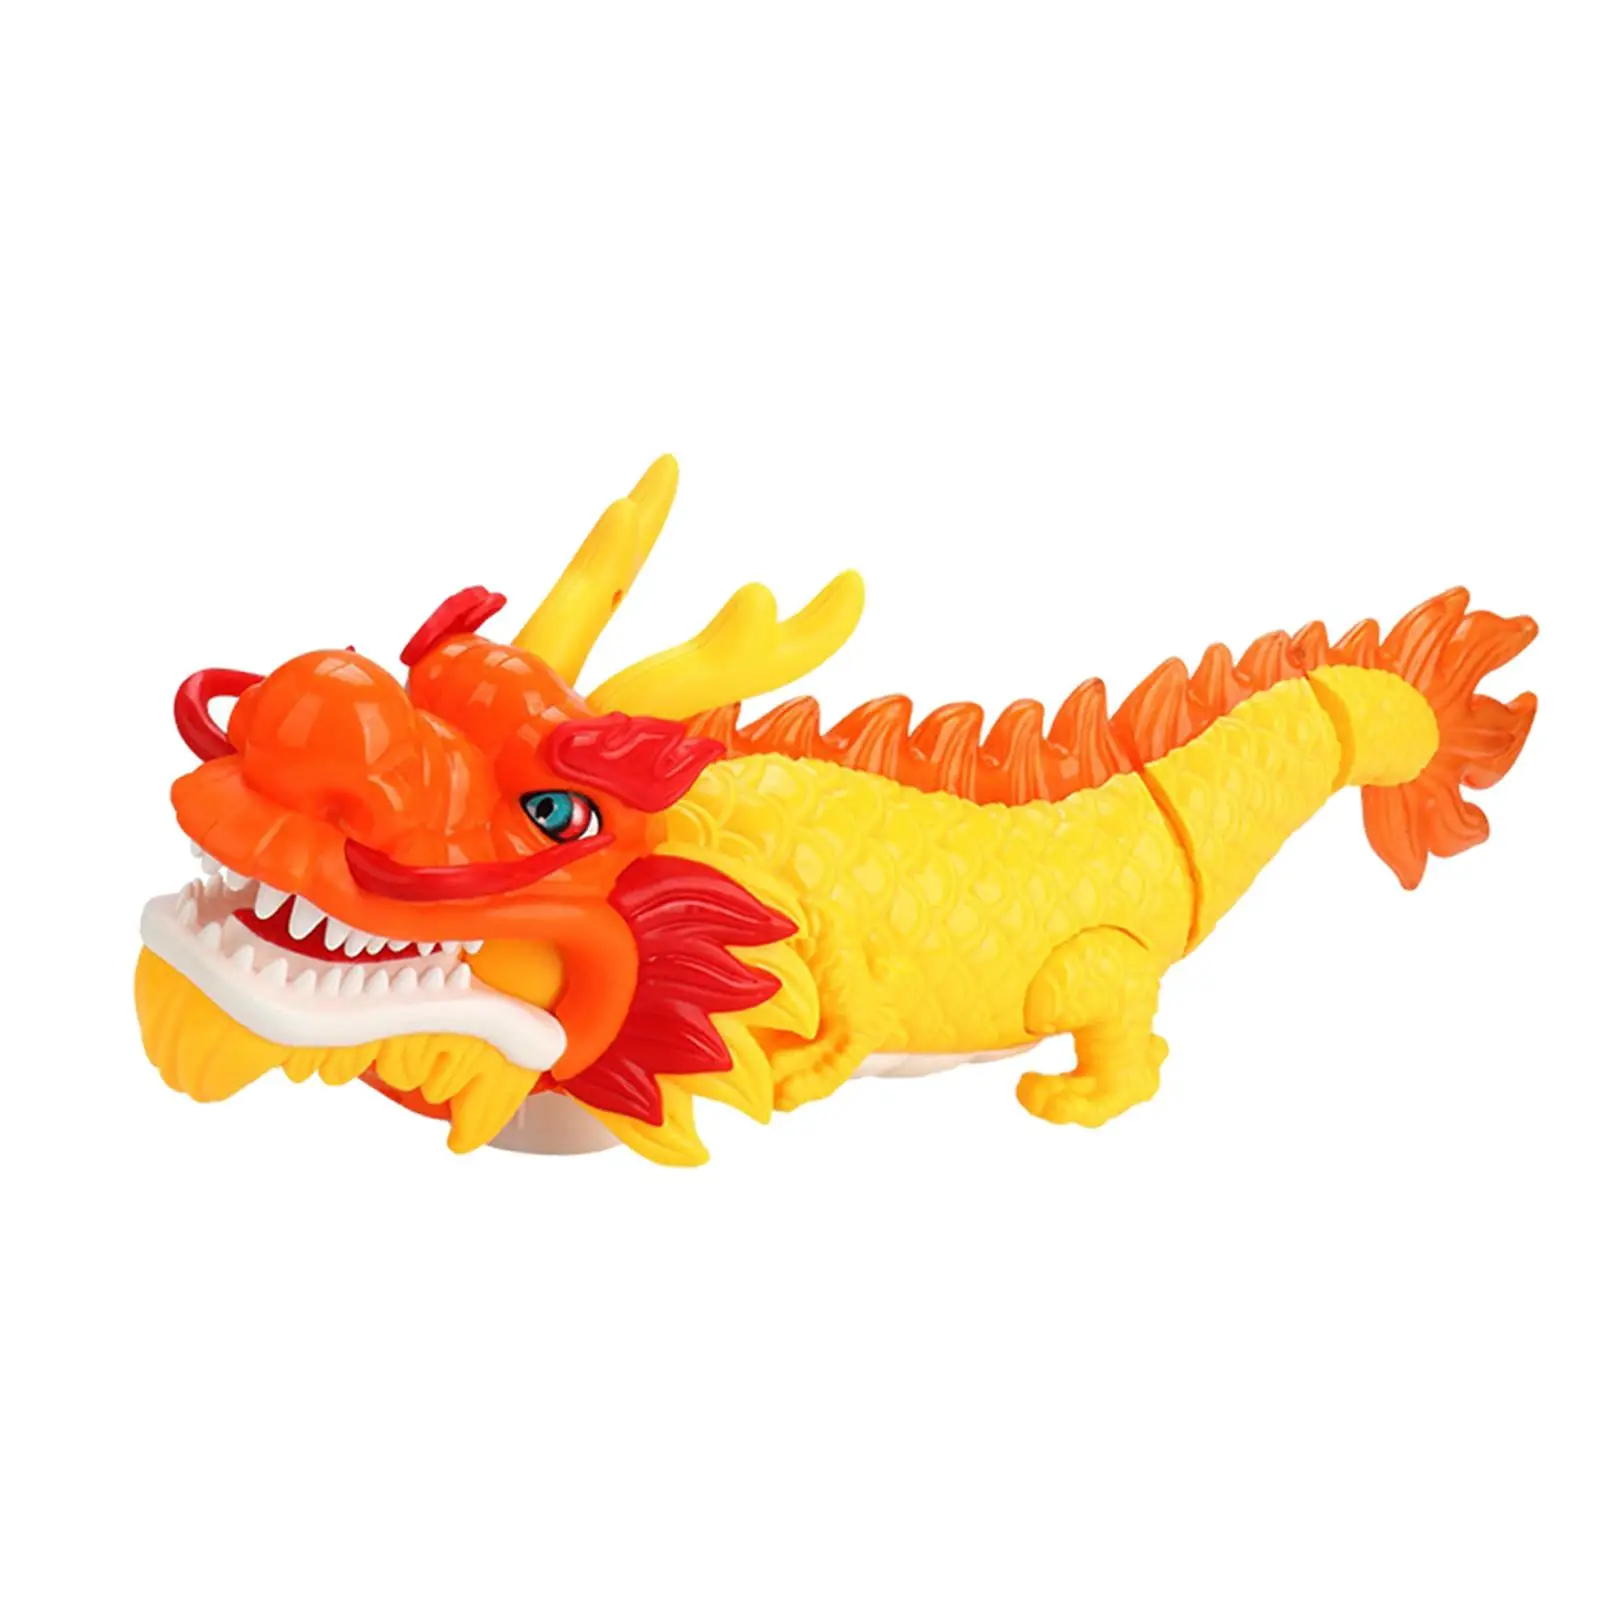 Eletric Dragon Toy Bathroom Outdoor Gifts High Simulation Crawling Toy for Boy 4 5 6 7 8 9 Year Olds Adults Children Girls